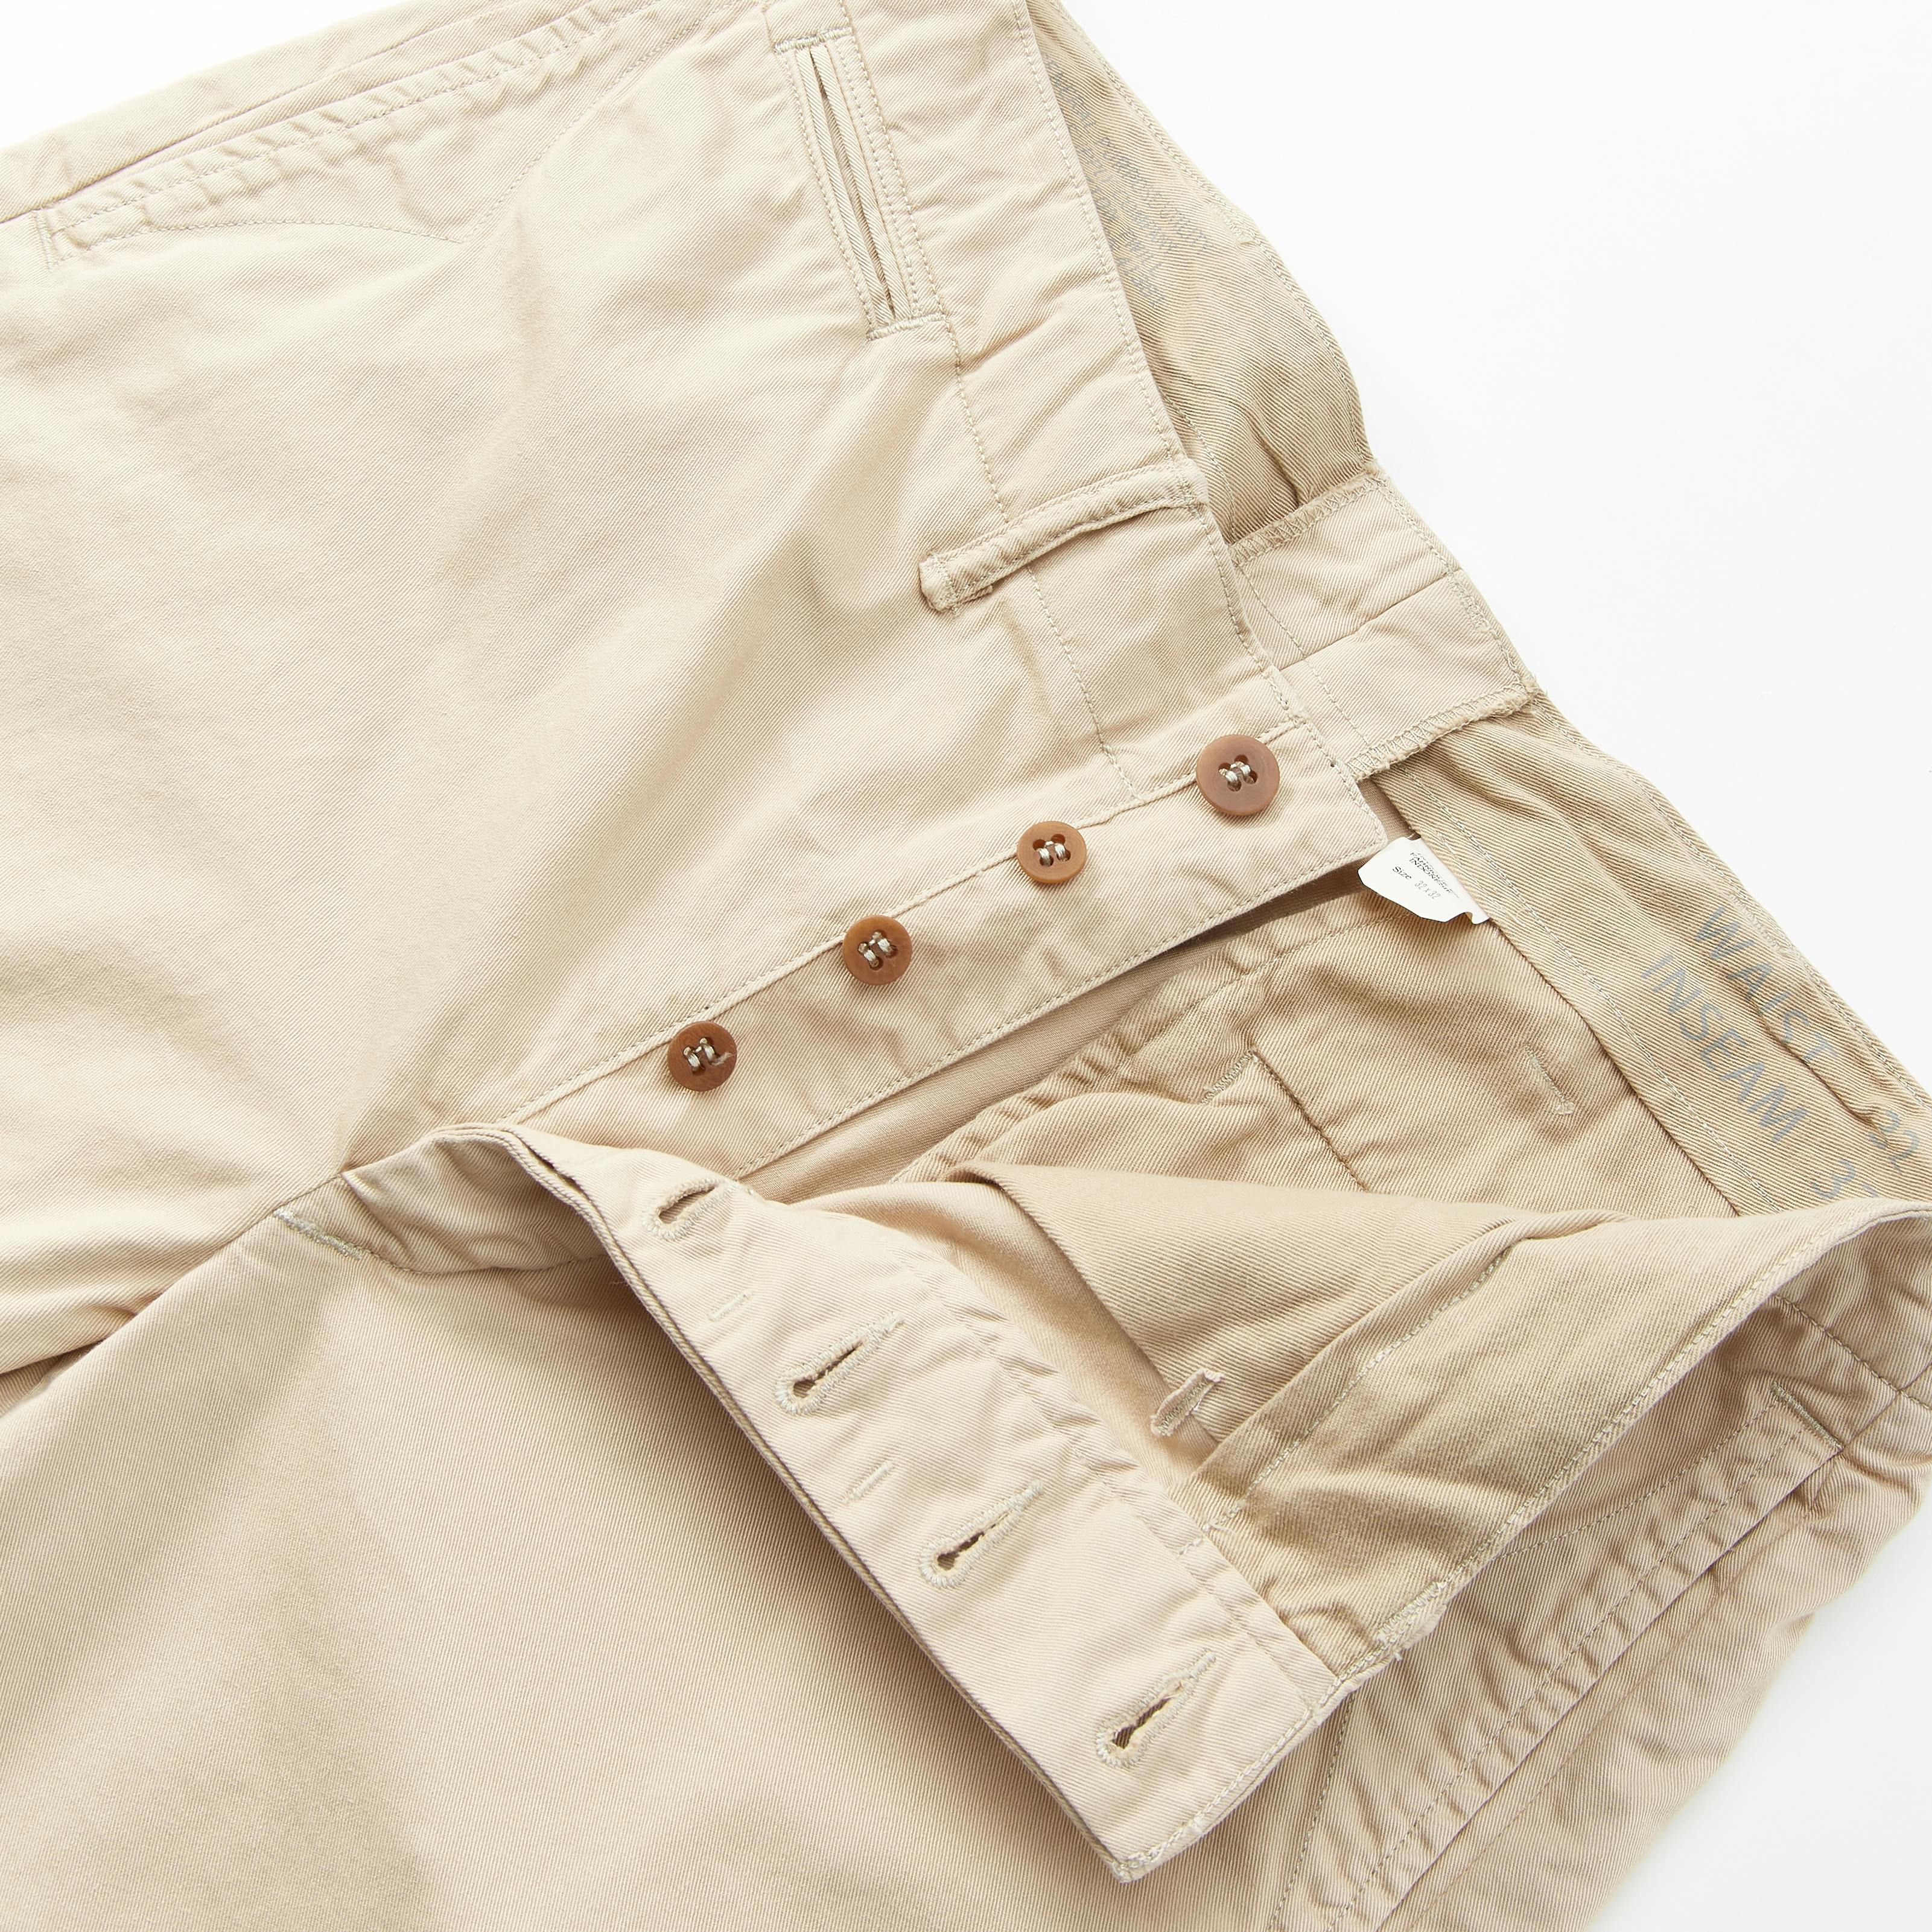 Cotton Twill Officer's Chino